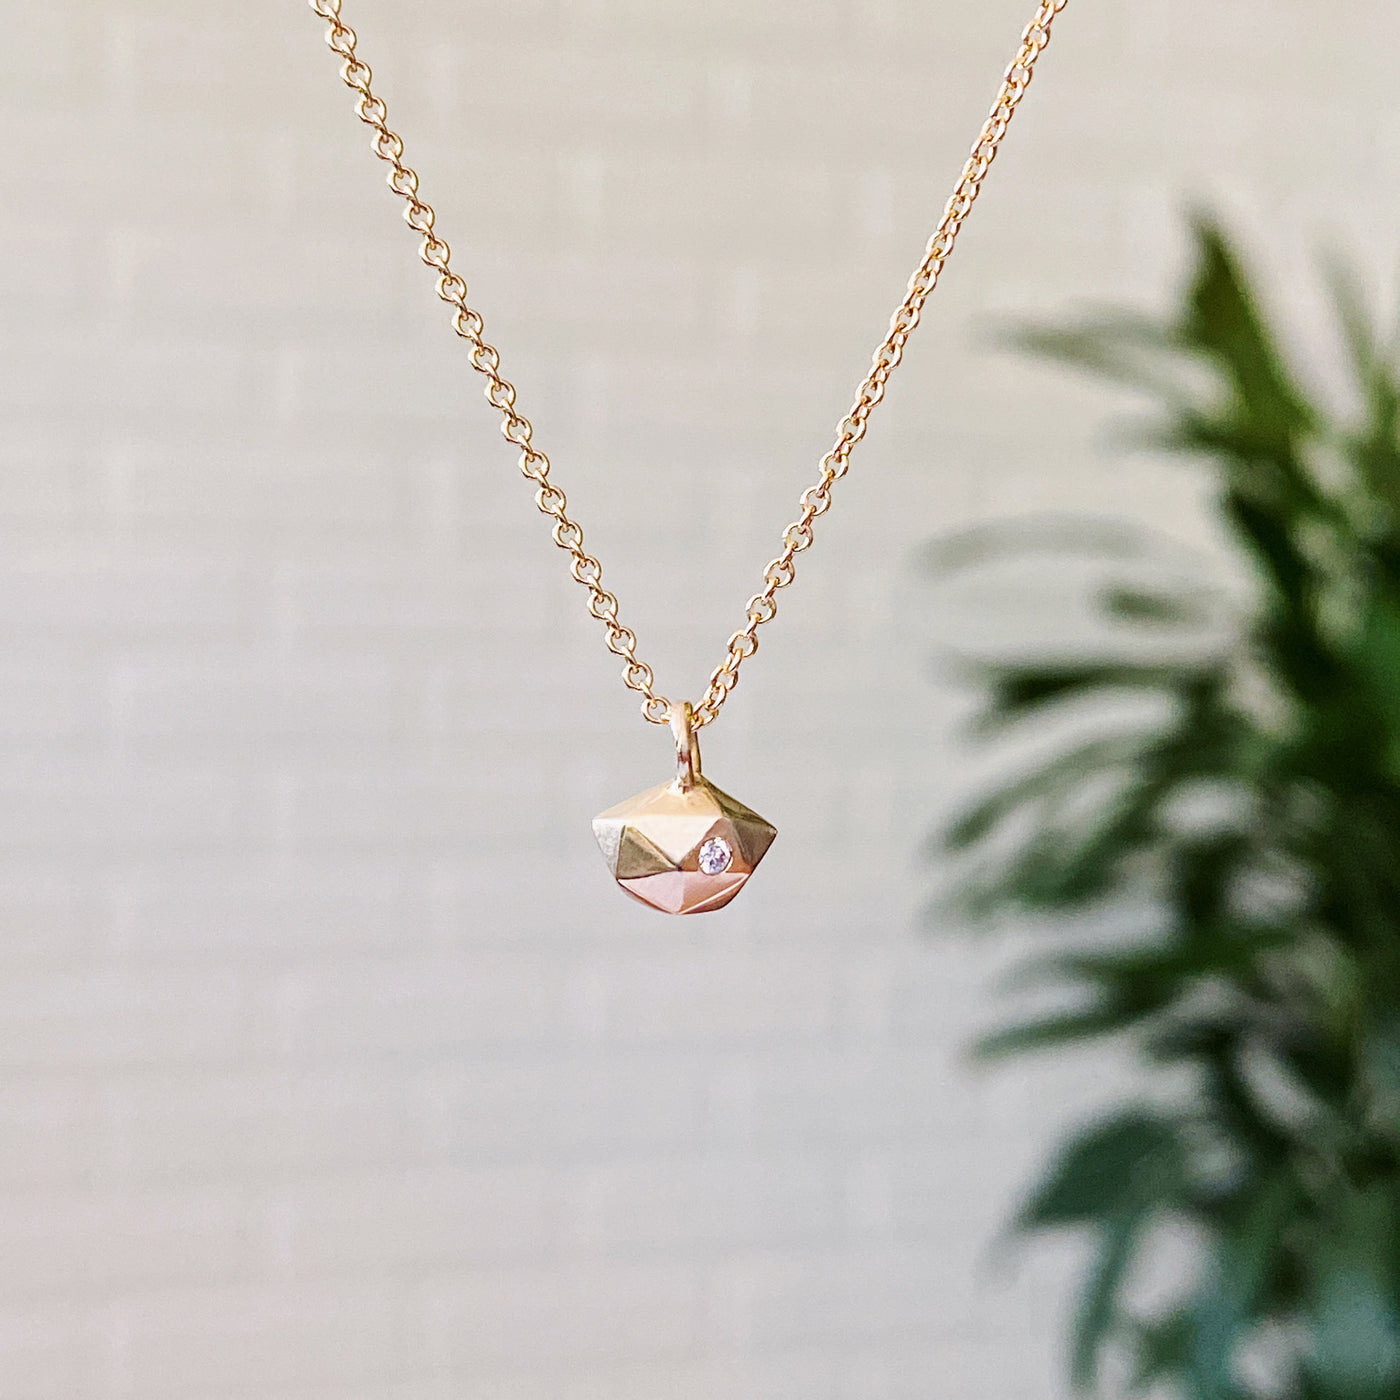 Faceted geometric gold tiny fragment necklace with a single white diamond in one facet in natural light | Corey Egan